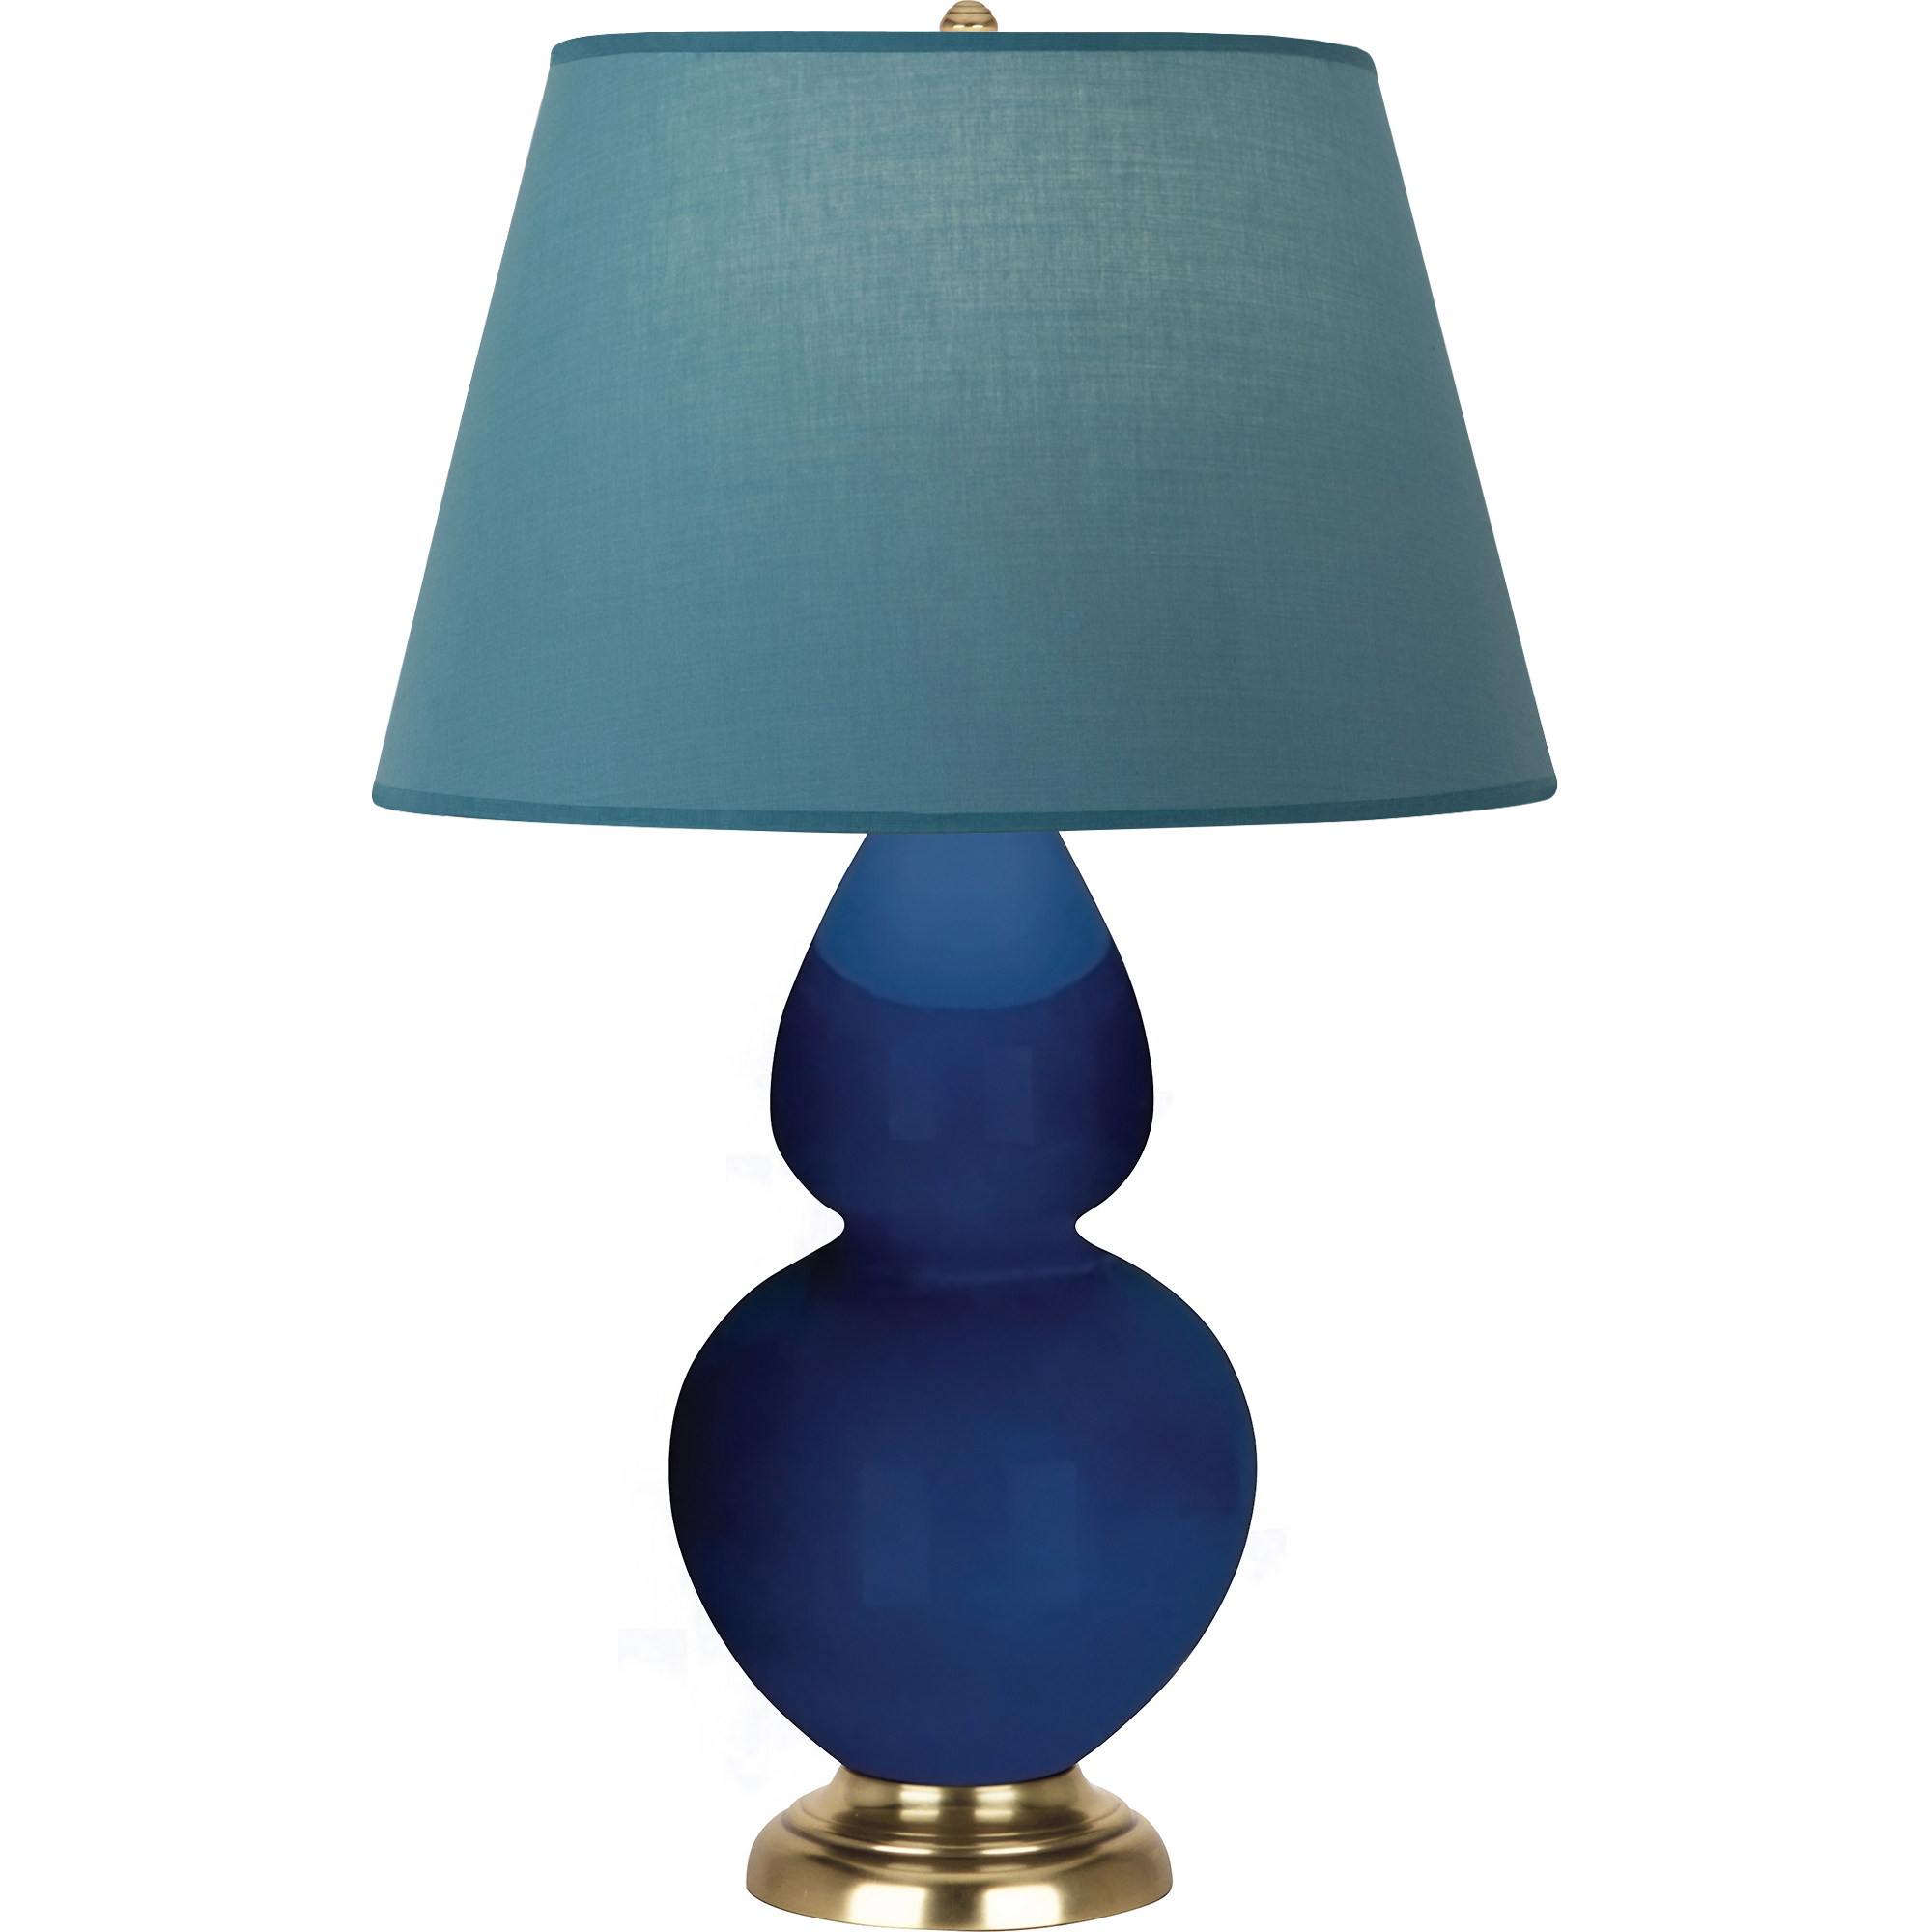 Double Gourd Table Lamp Style #CT20B